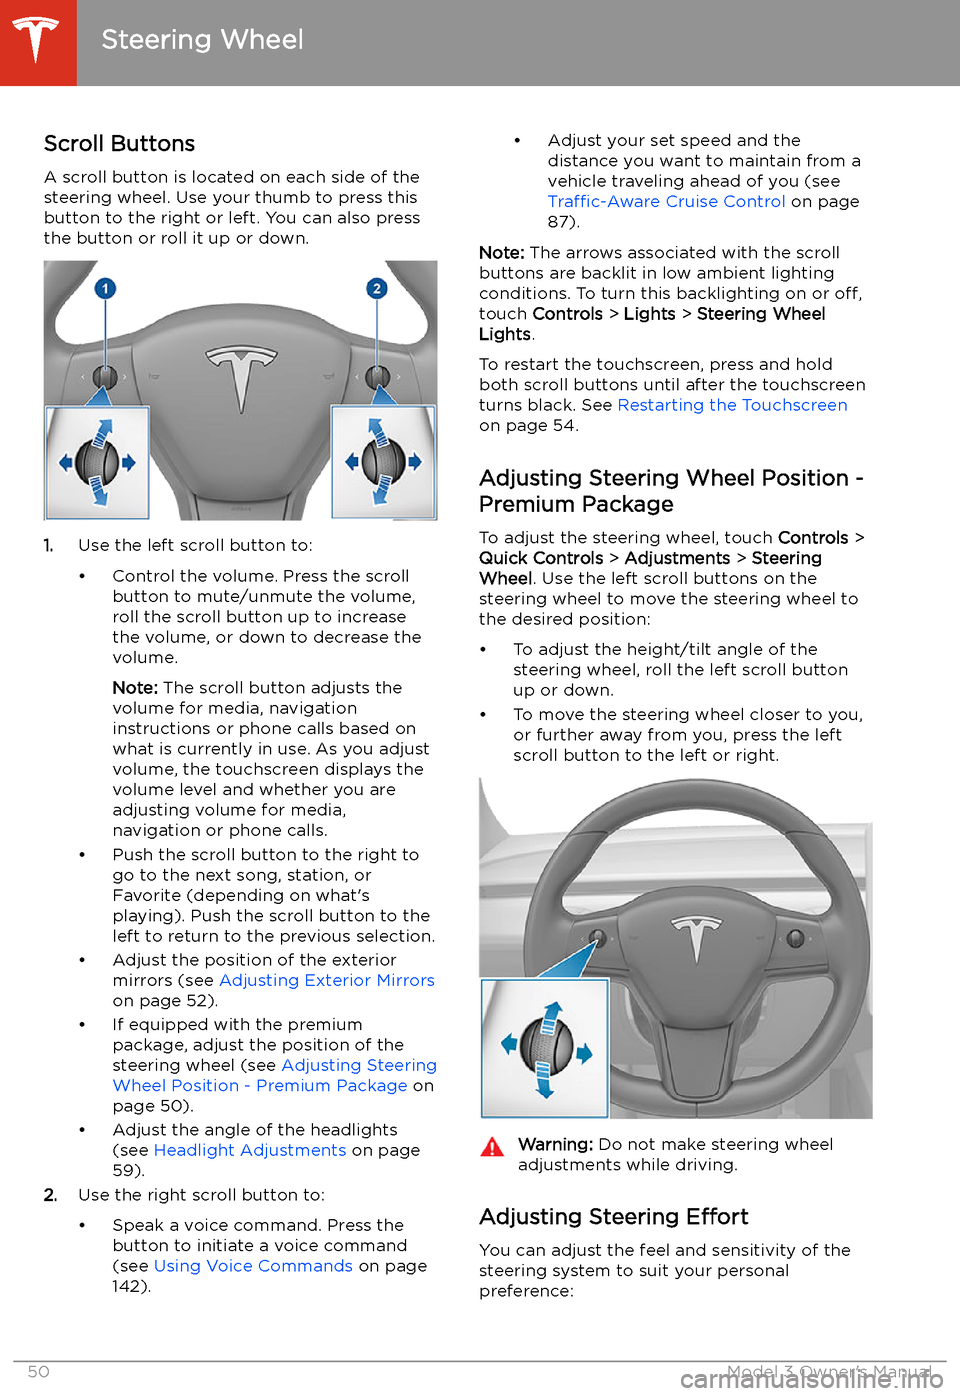 TESLA MODEL 3 2020  Owners Manuals Steering Wheel
Scroll Buttons
A scroll button is located on each side of the
steering wheel. Use your thumb to press this
button to the right or left. You can also press
the button or roll it up or do